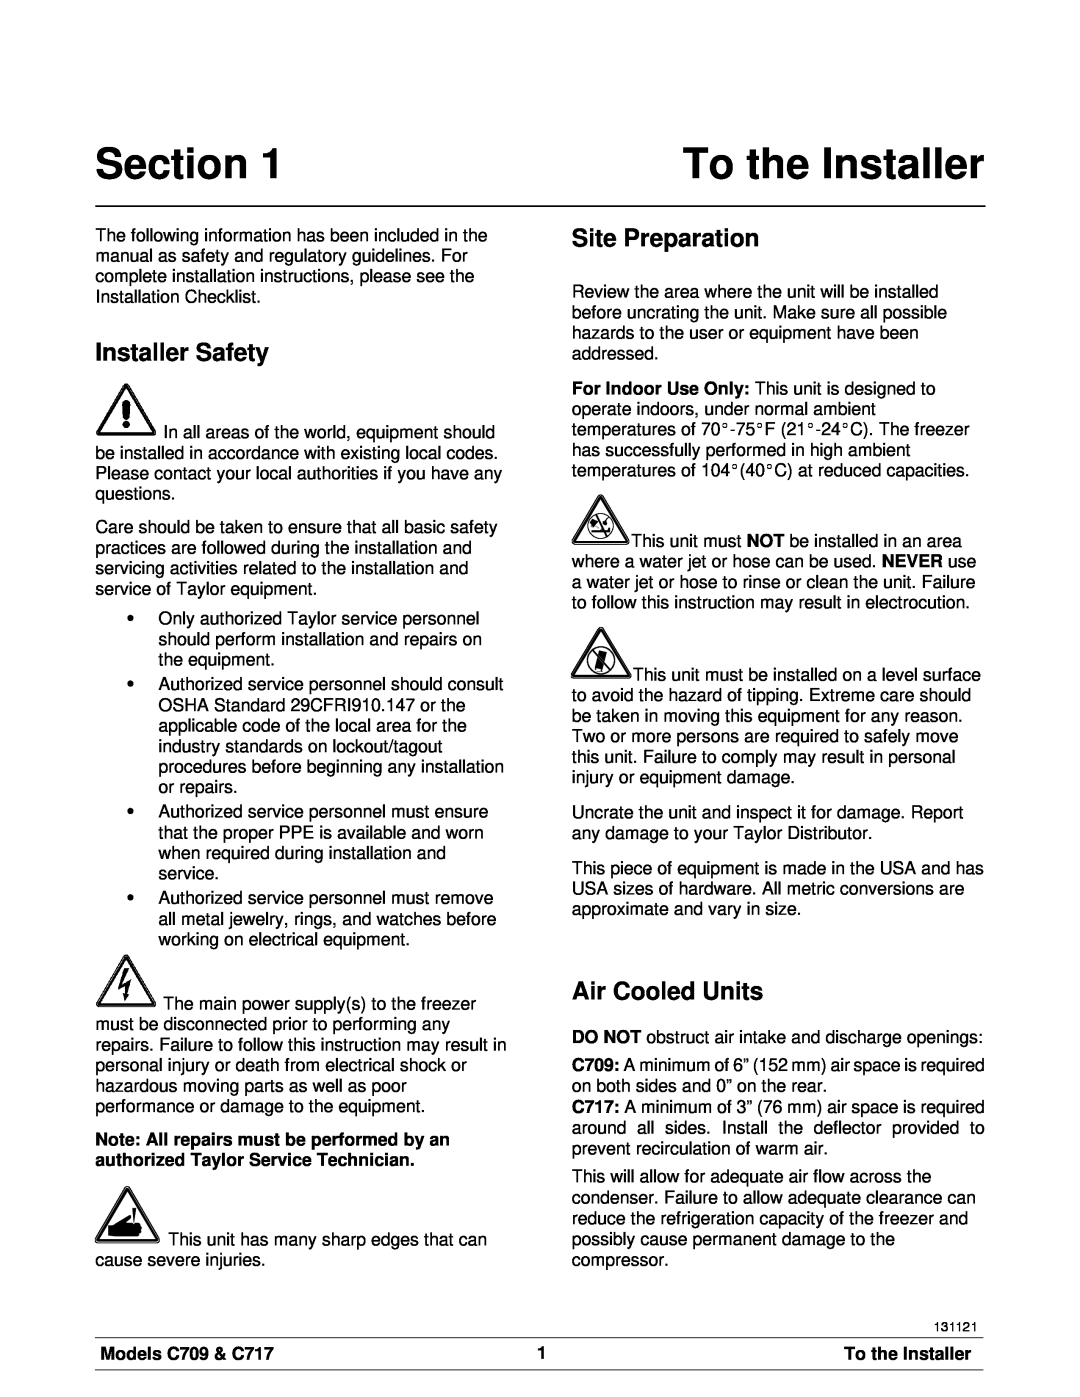 Taylor manual Section, Installer Safety, Site Preparation, Air Cooled Units, To the Installer, Models C709 & C717 